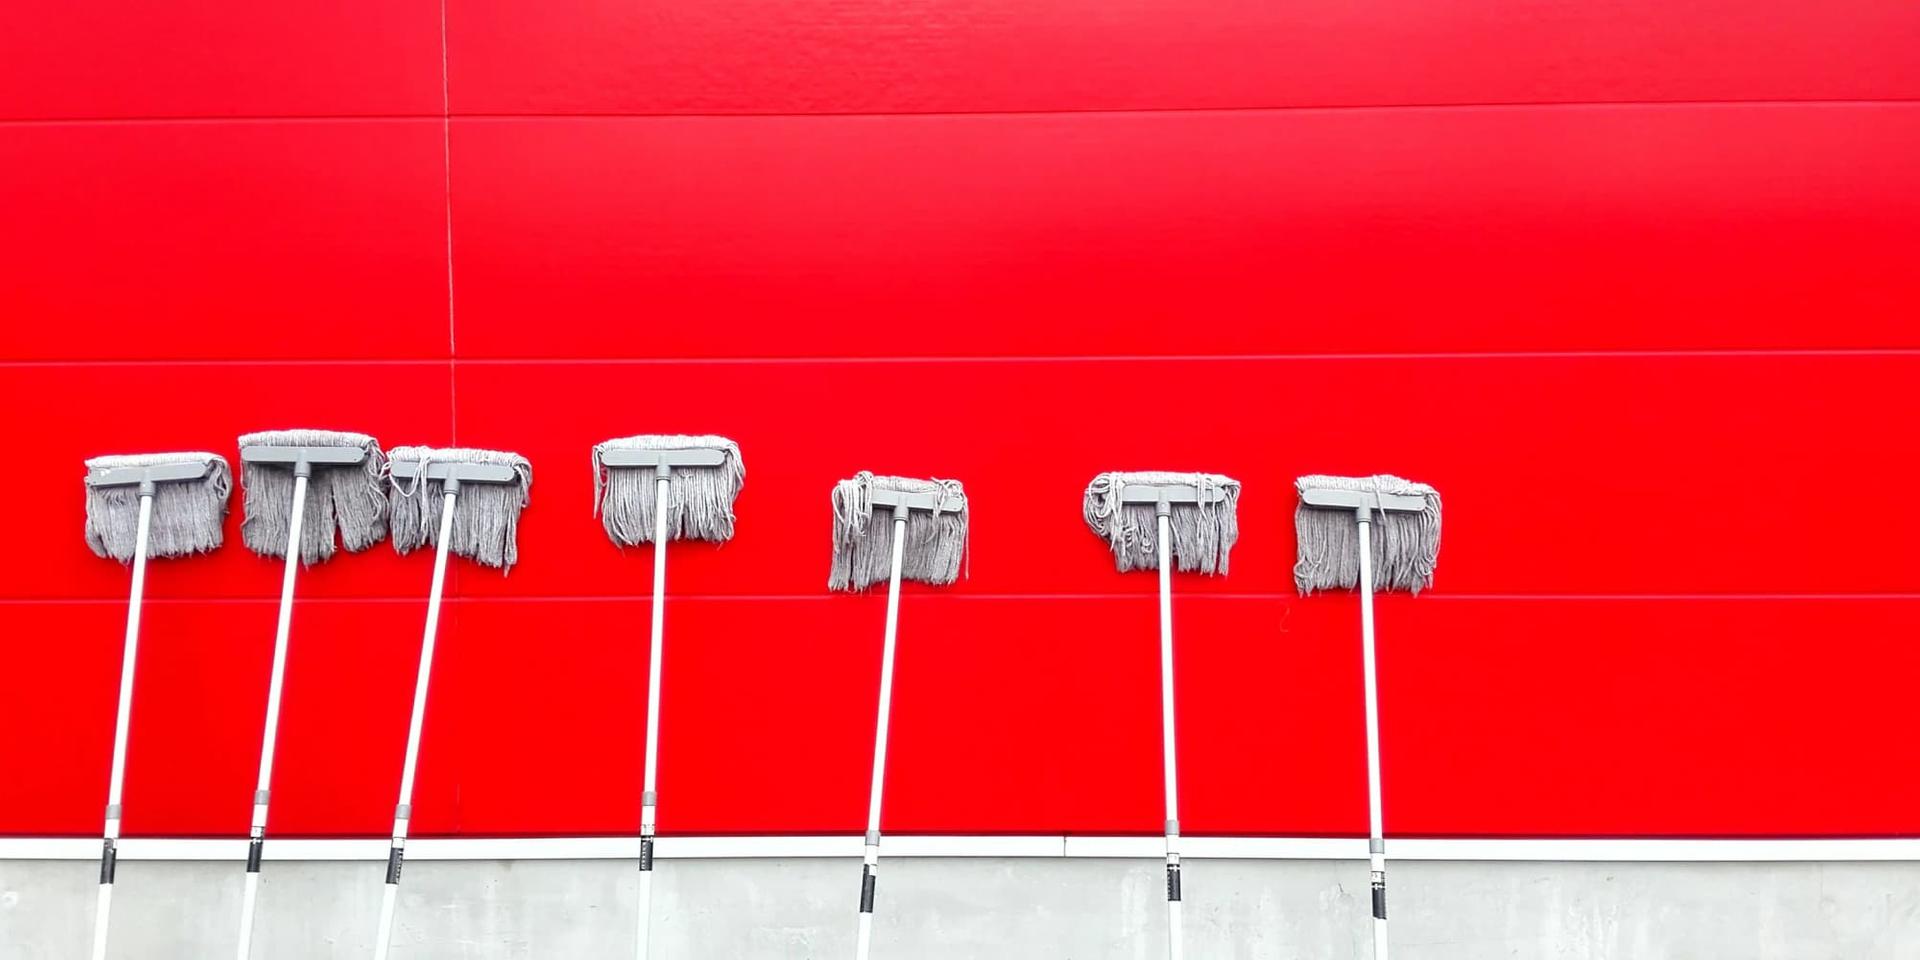 Seven mops leaning against a red wall